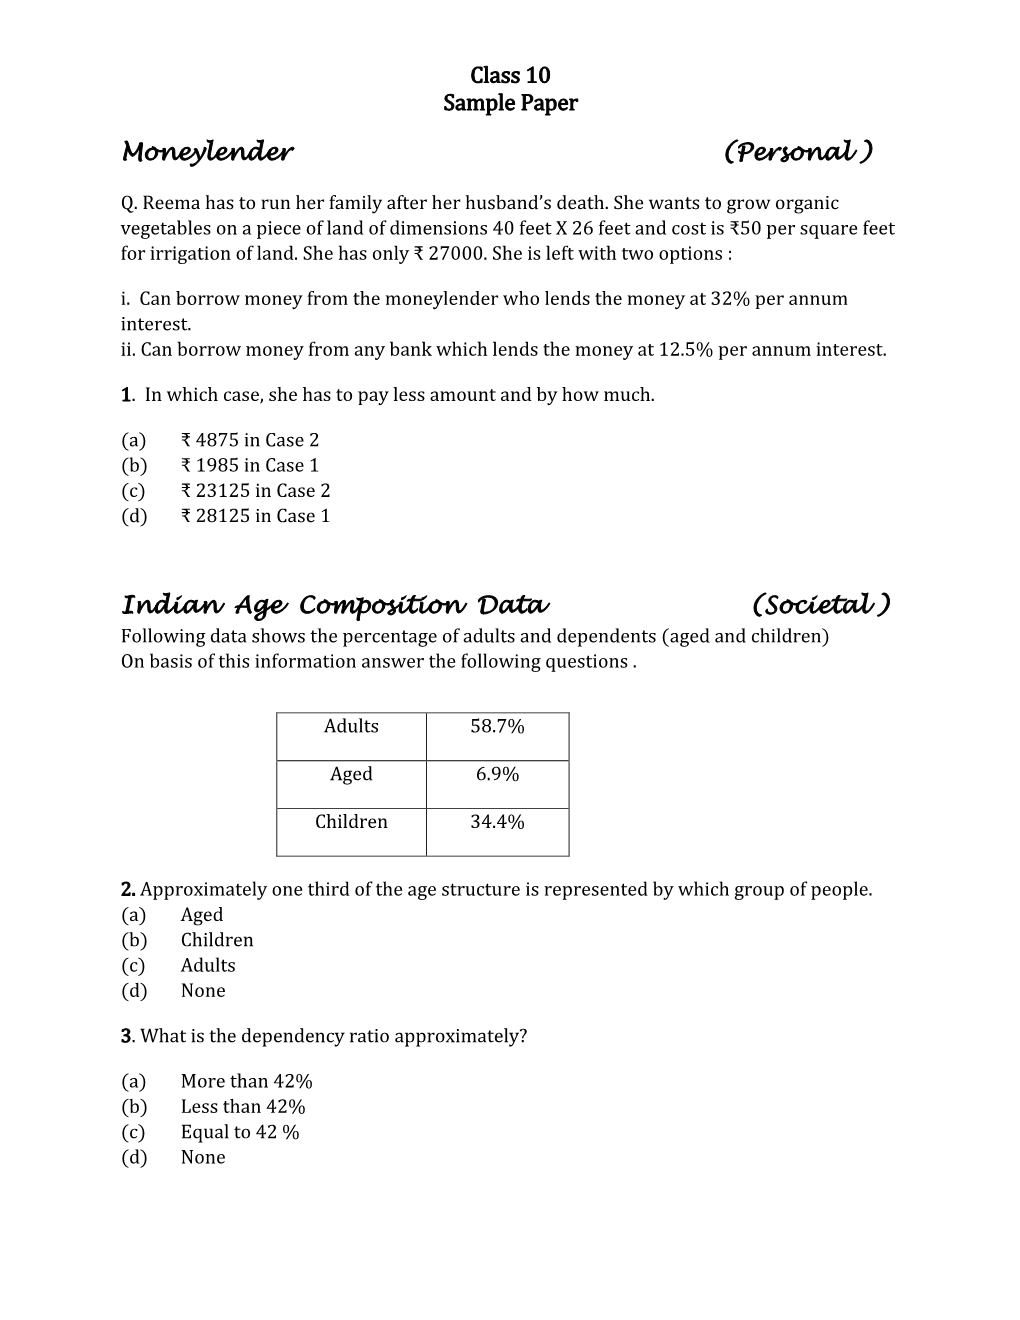 Class 10 Sample Paper Moneylender (Personal ) Indian Age Composition